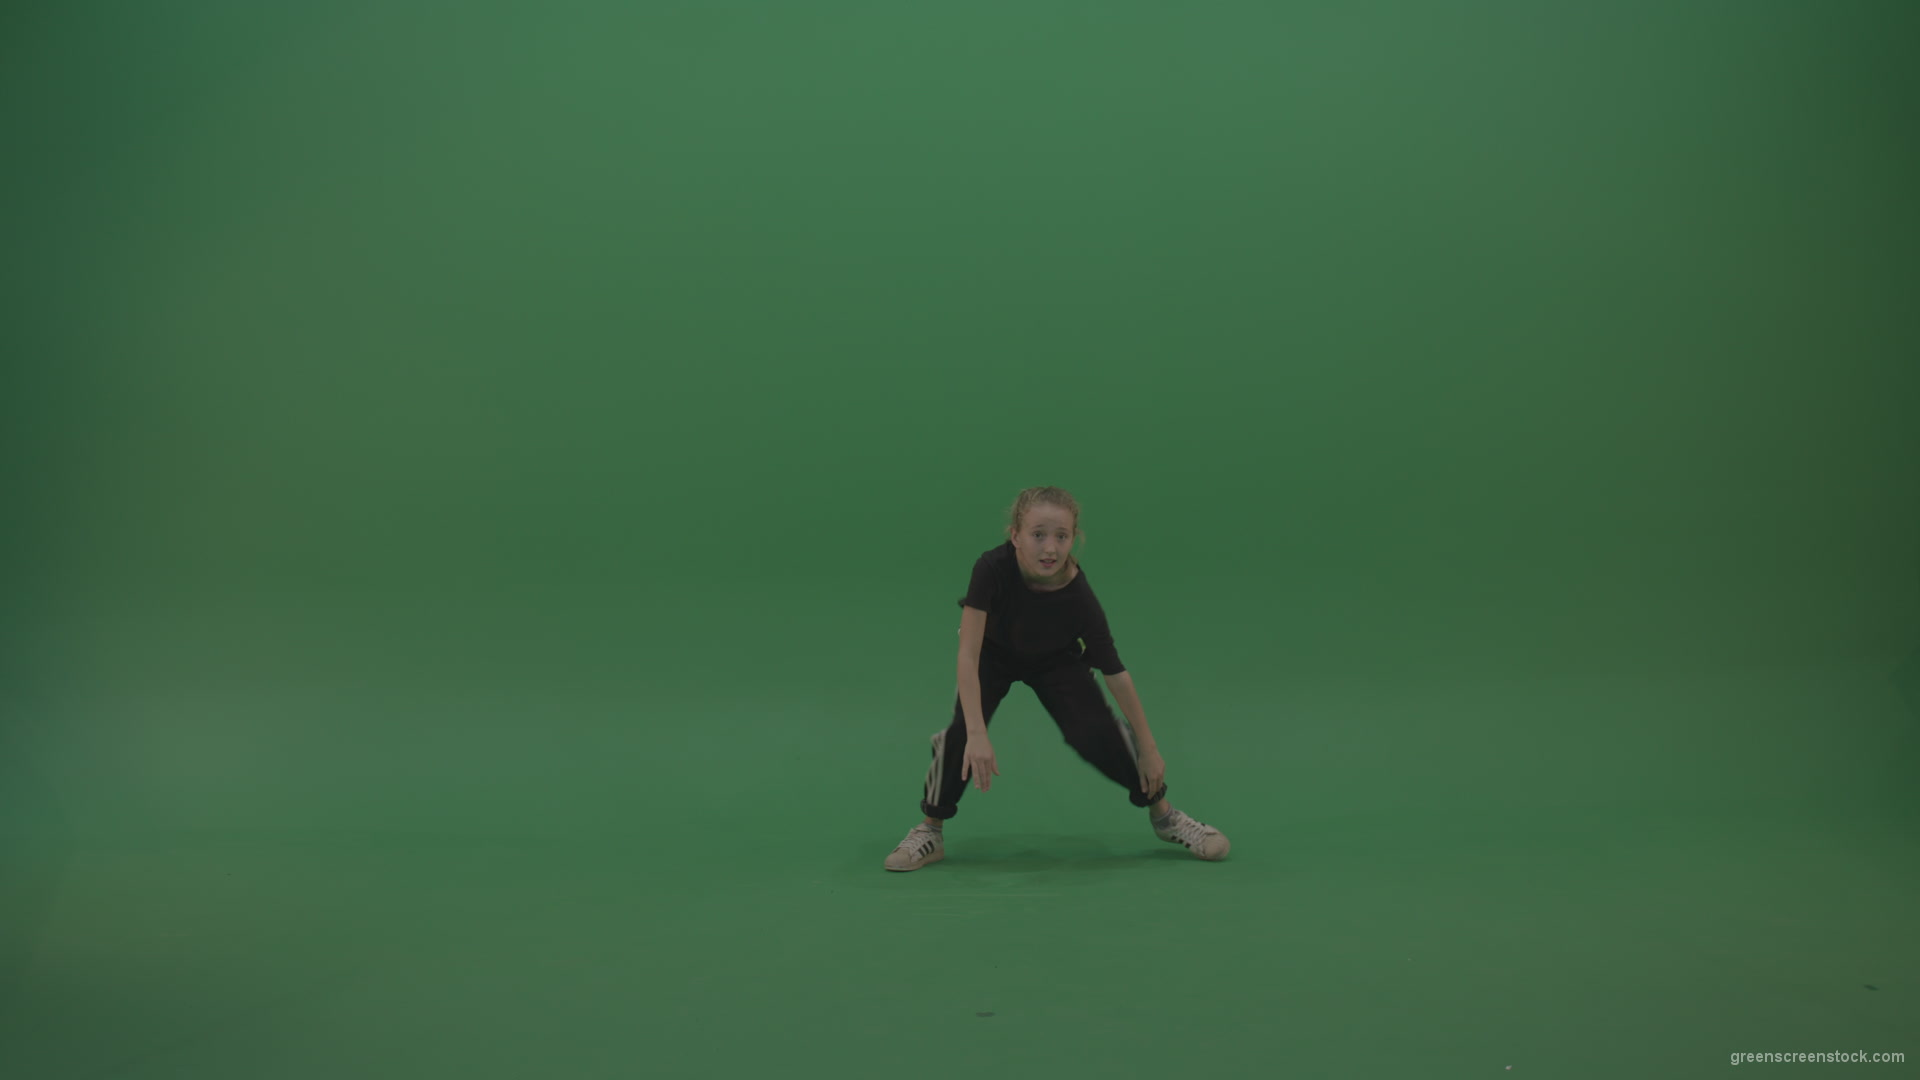 Incredible_Dance_Hip_Hop_Moves_From_Young_SmalKid_Female_Wearing_Black_Sweat_Suite_And_White_Trainers_On_Green_Screen_Wall_Background_007 Green Screen Stock